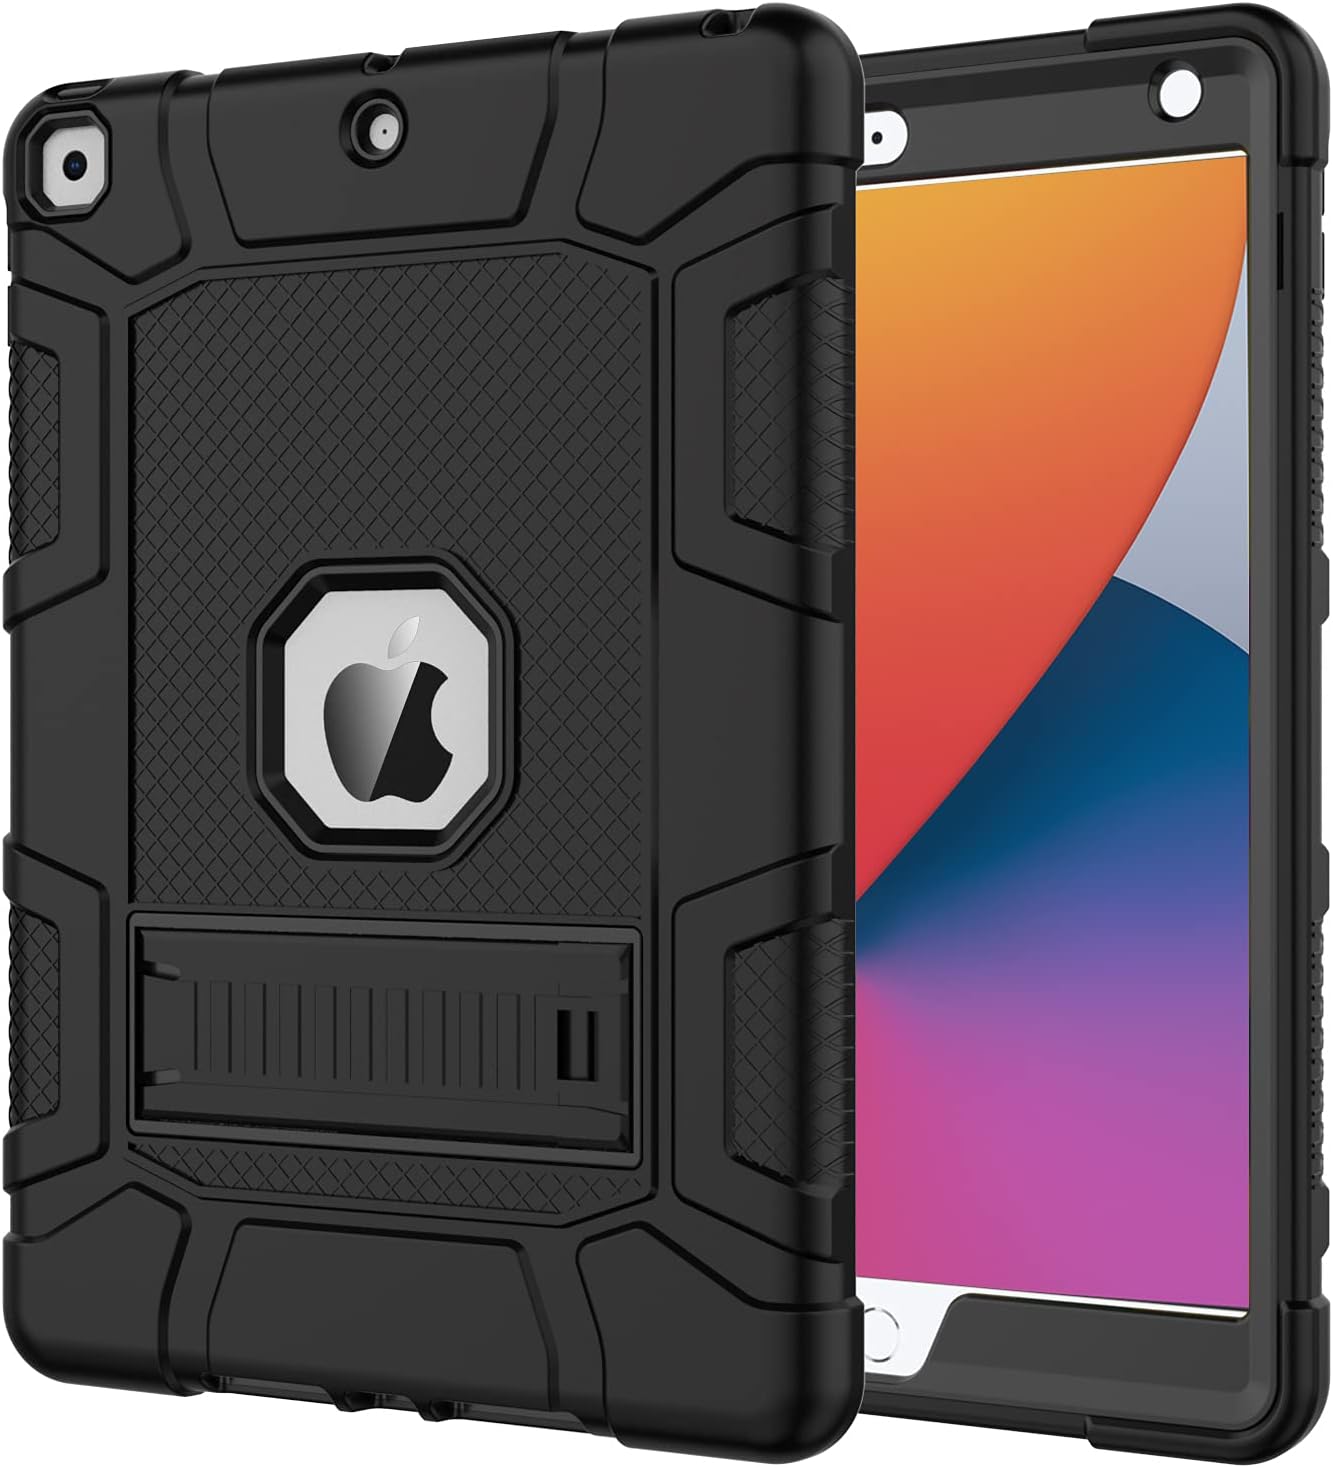 Limited-Time Promo: Azzsy Case for iPad 9th/ 8th/ 7th Generation (10.2 Inch, 2021/2020/2019 Model) - Slim Heavy Duty Shockproof Rugged Protective Case (Black) - Now Only $13.59!